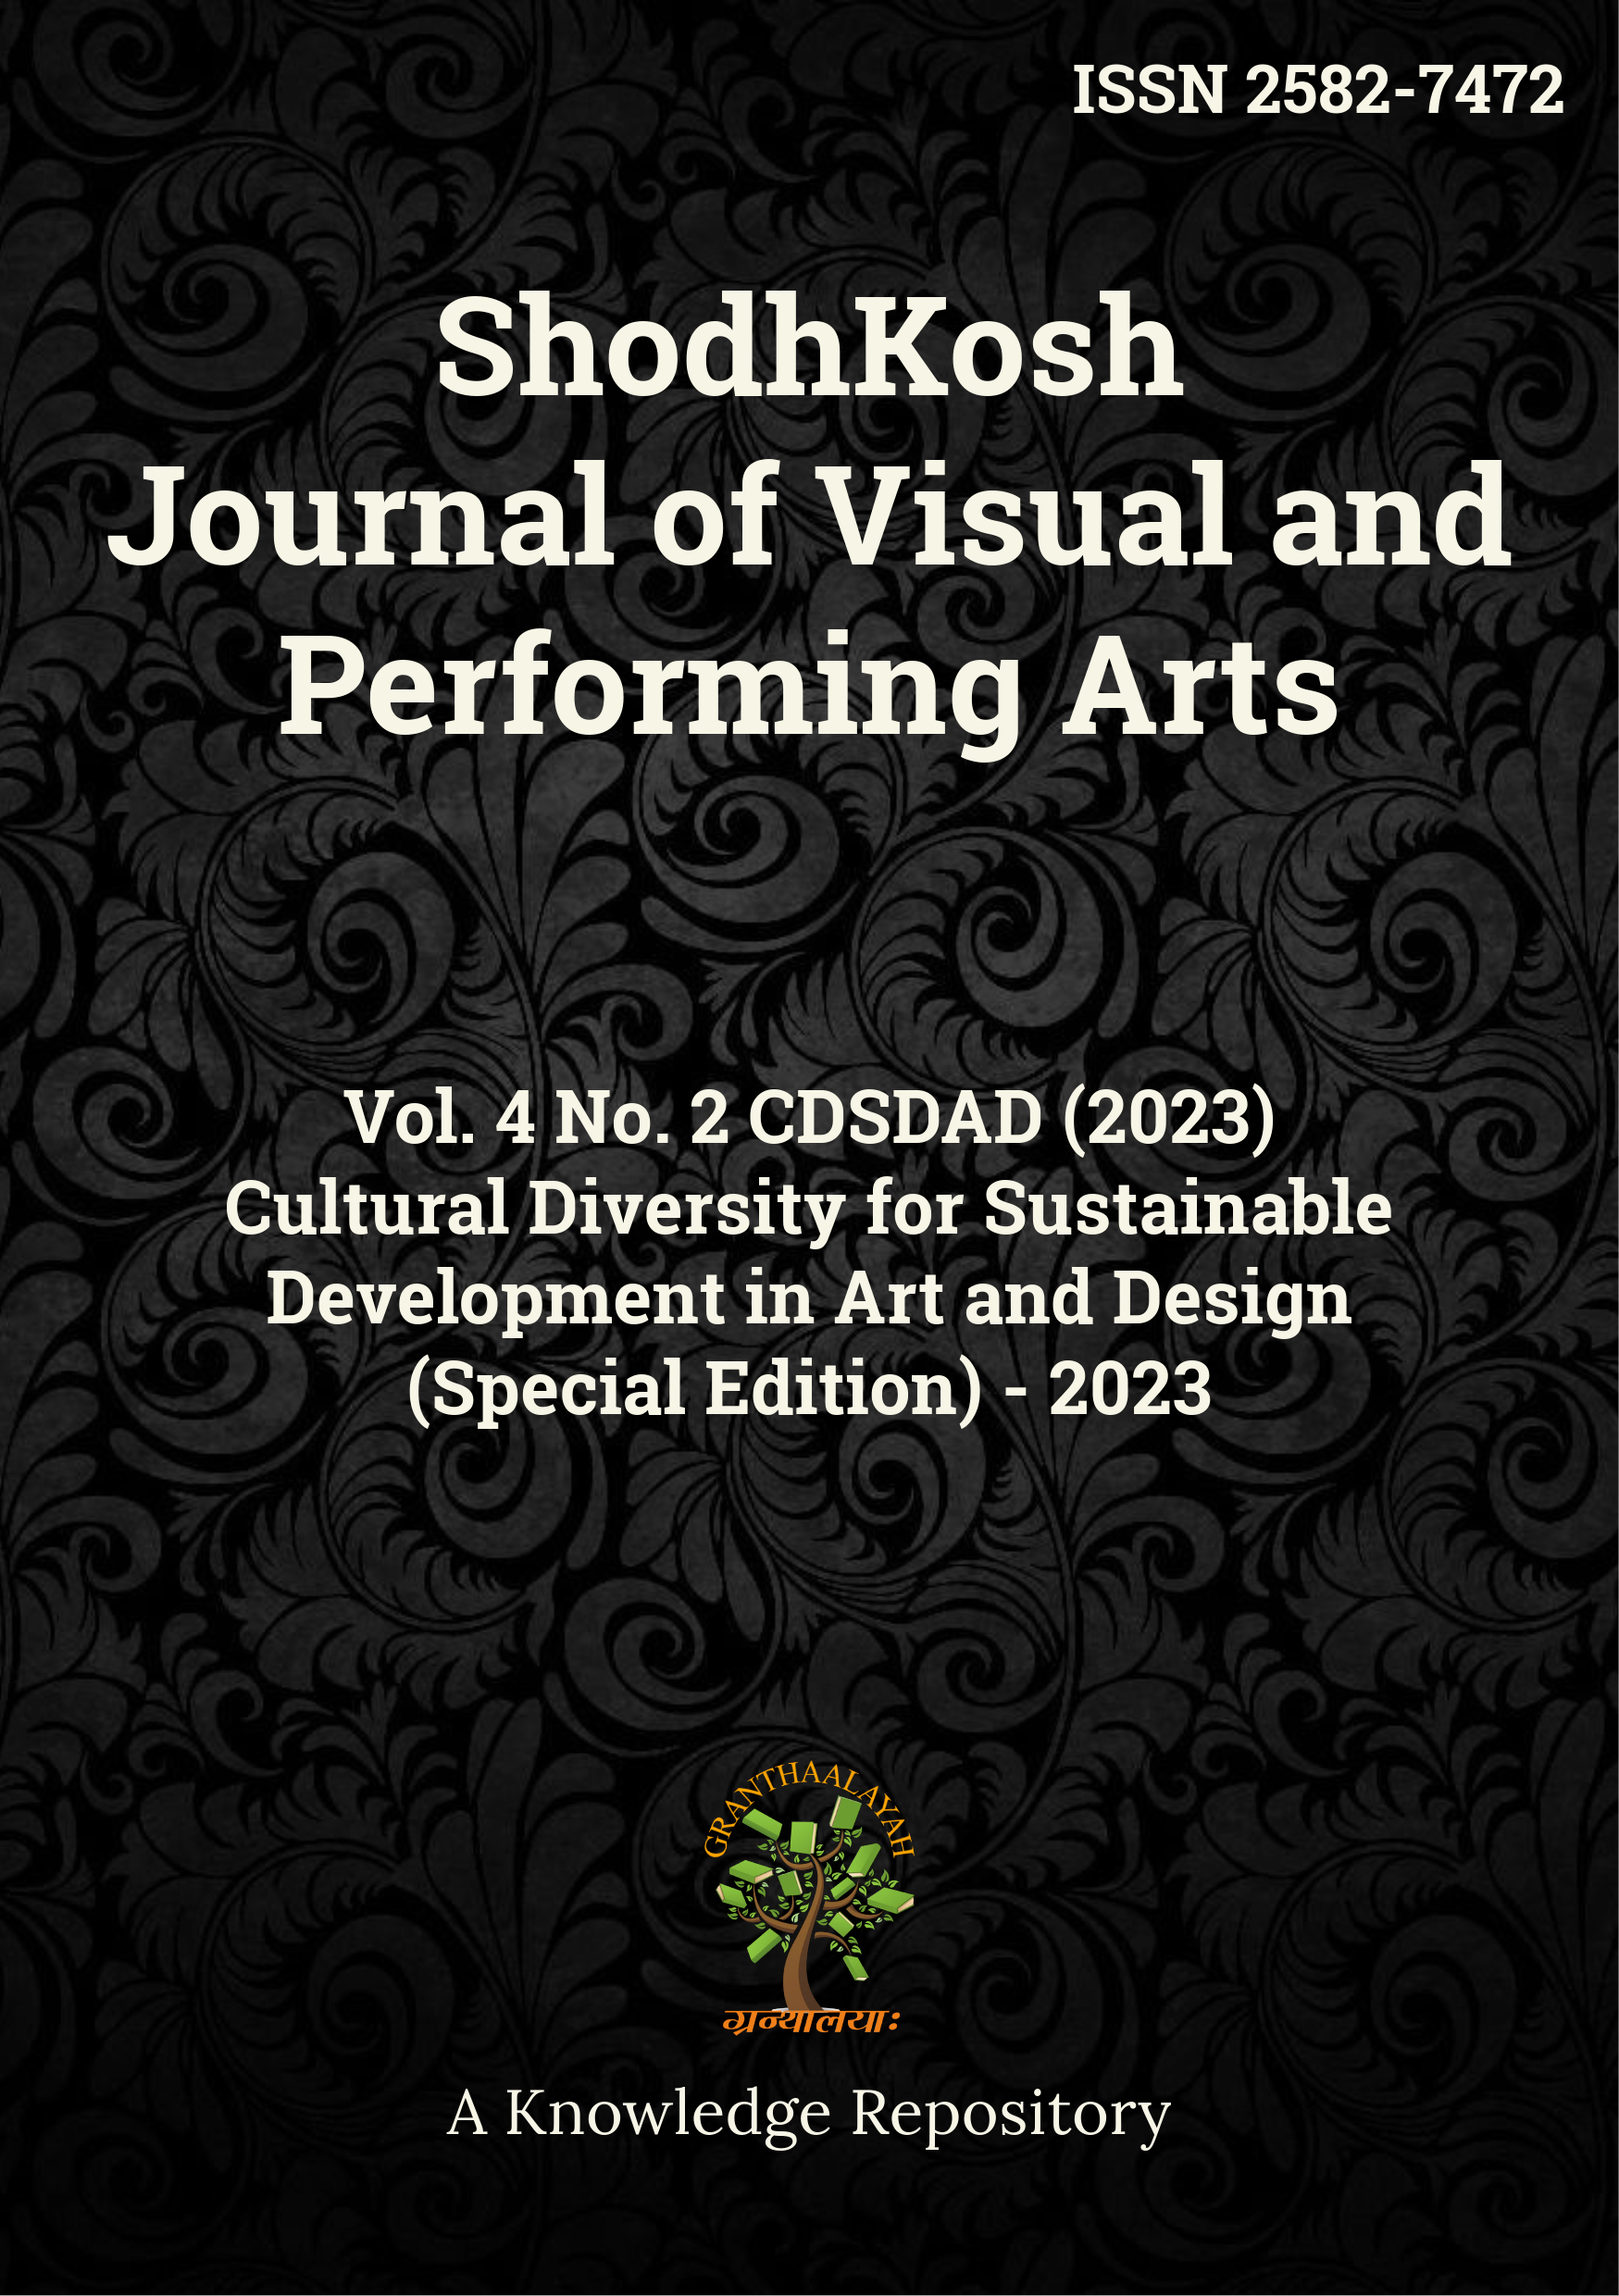 					View Vol. 4 No. 2CDSDAD (2023): Cultural Diversity for Sustainable Development in Art and Design
				